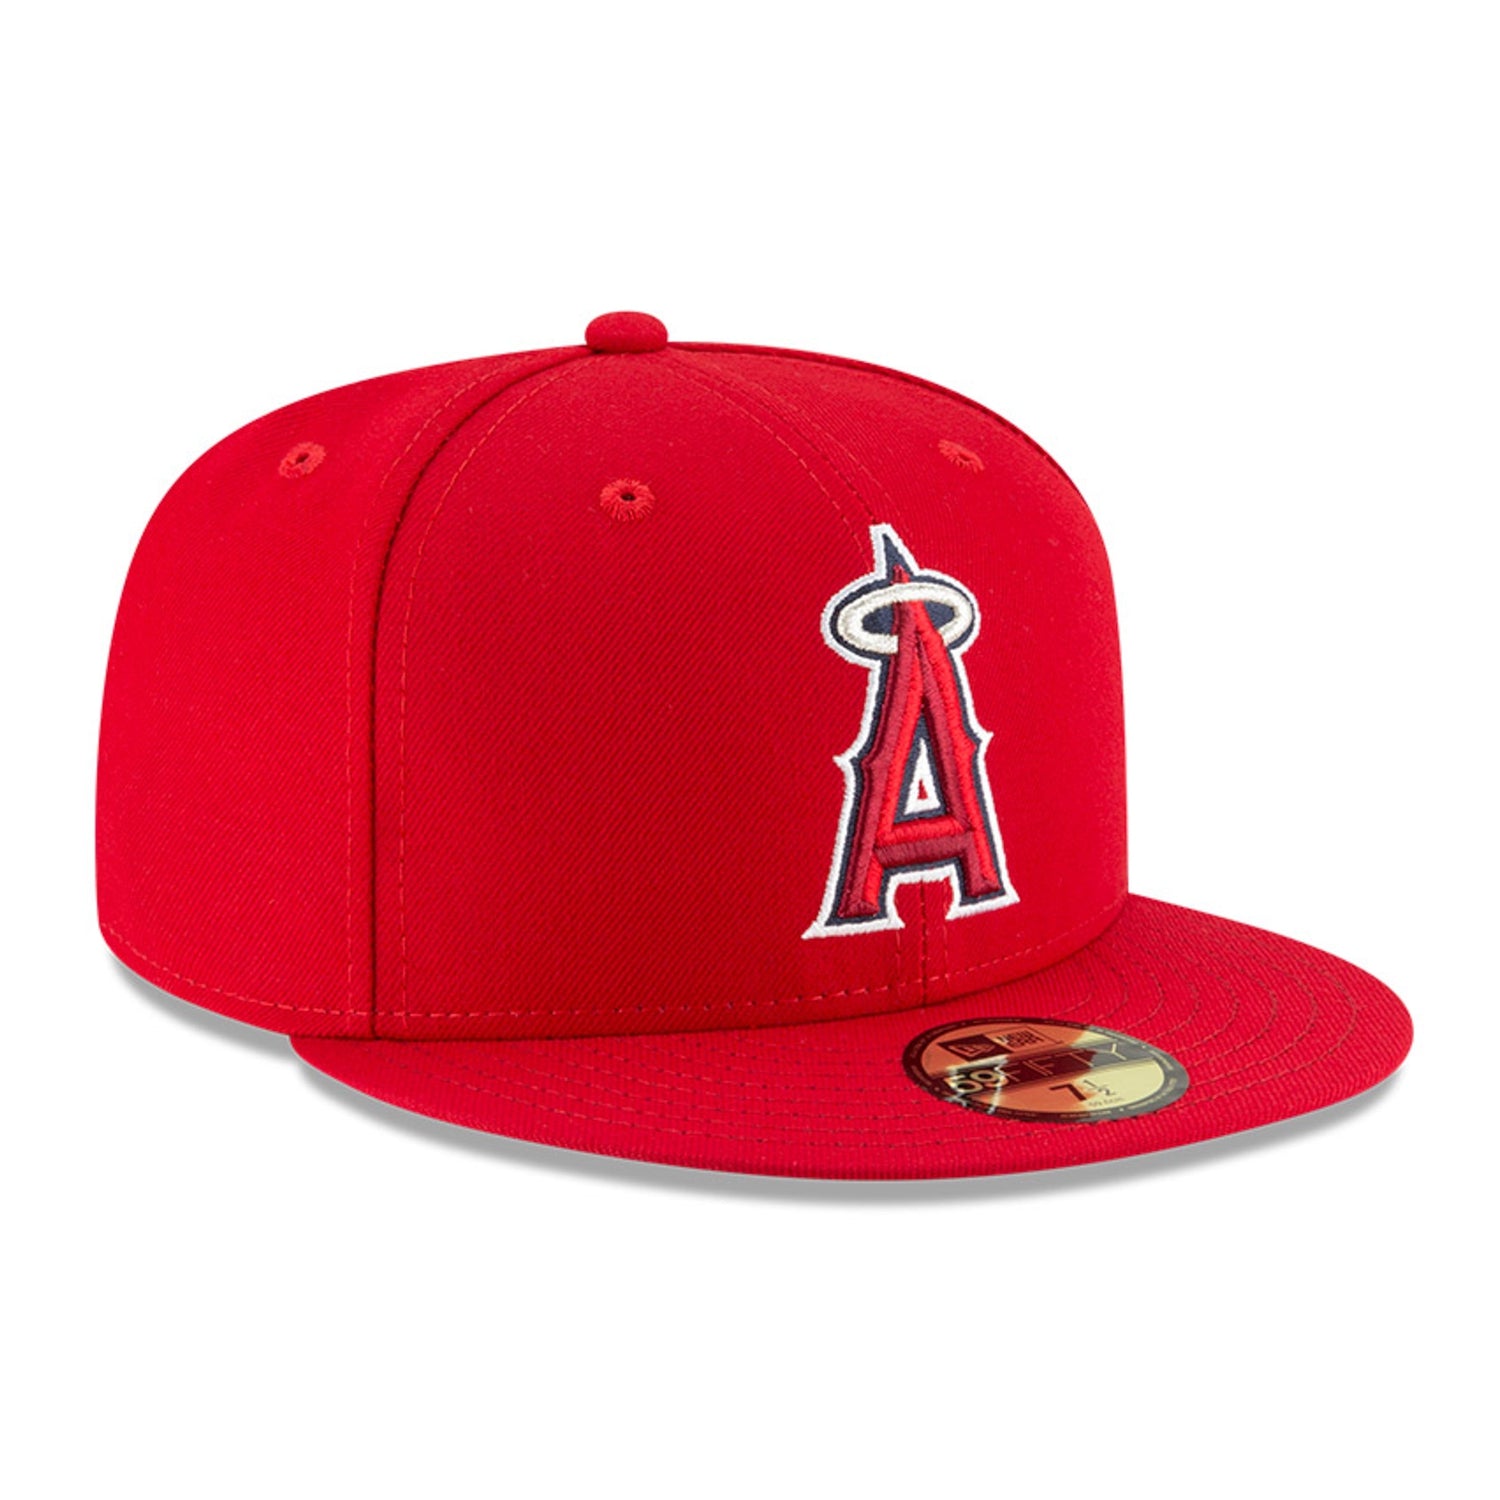 New Era 59Fifty Authentic Collection Los Angeles Angels Game Hat